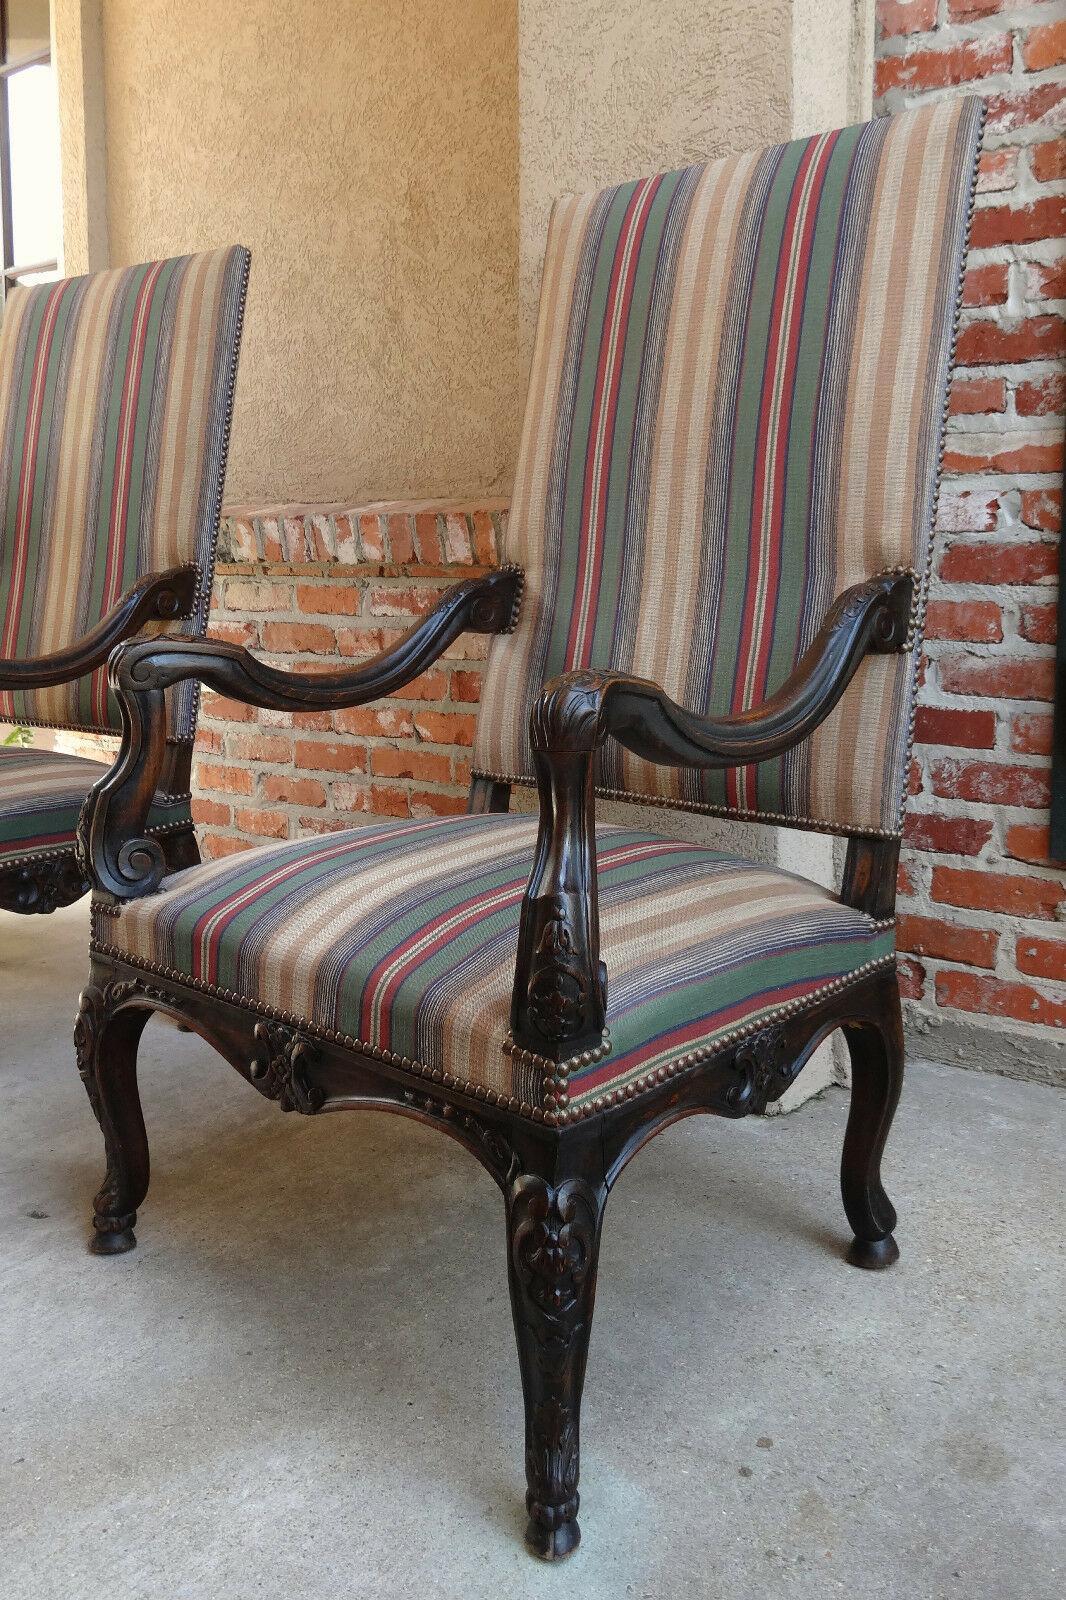 ~ Direct from France
~ Absolutely stunning antique French armchair
~ Tall & majestic
~ Hand-sculpted from fine French walnut in the manner of Louis XV, this elegant chair features beautiful jewel tone striped textile upholstery
~ Serpentine